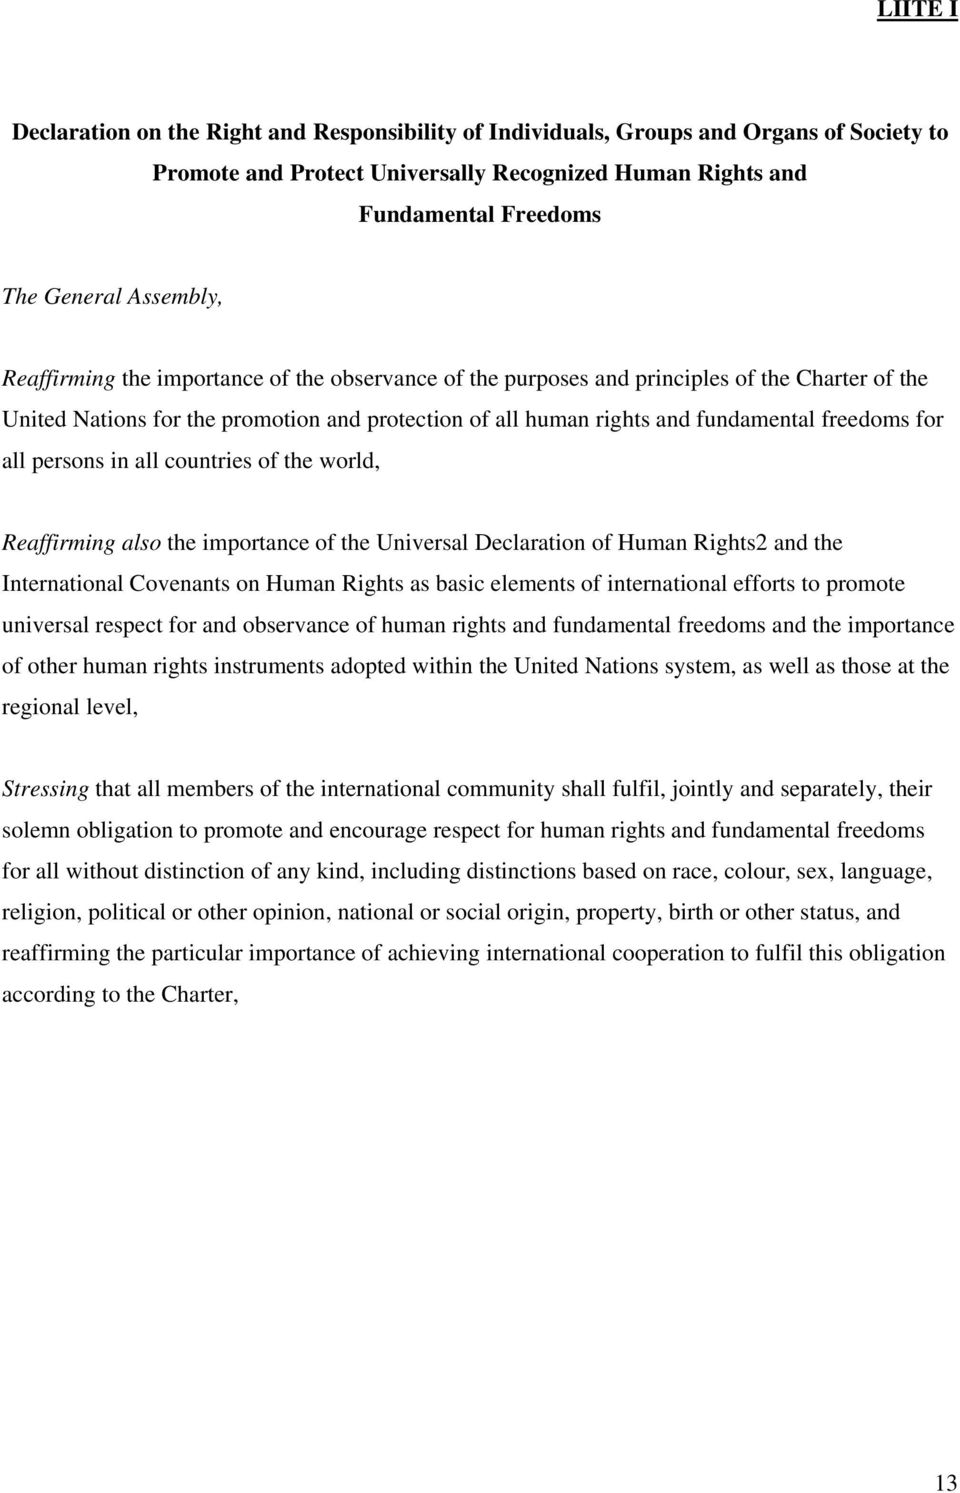 freedoms for all persons in all countries of the world, Reaffirming also the importance of the Universal Declaration of Human Rights2 and the International Covenants on Human Rights as basic elements